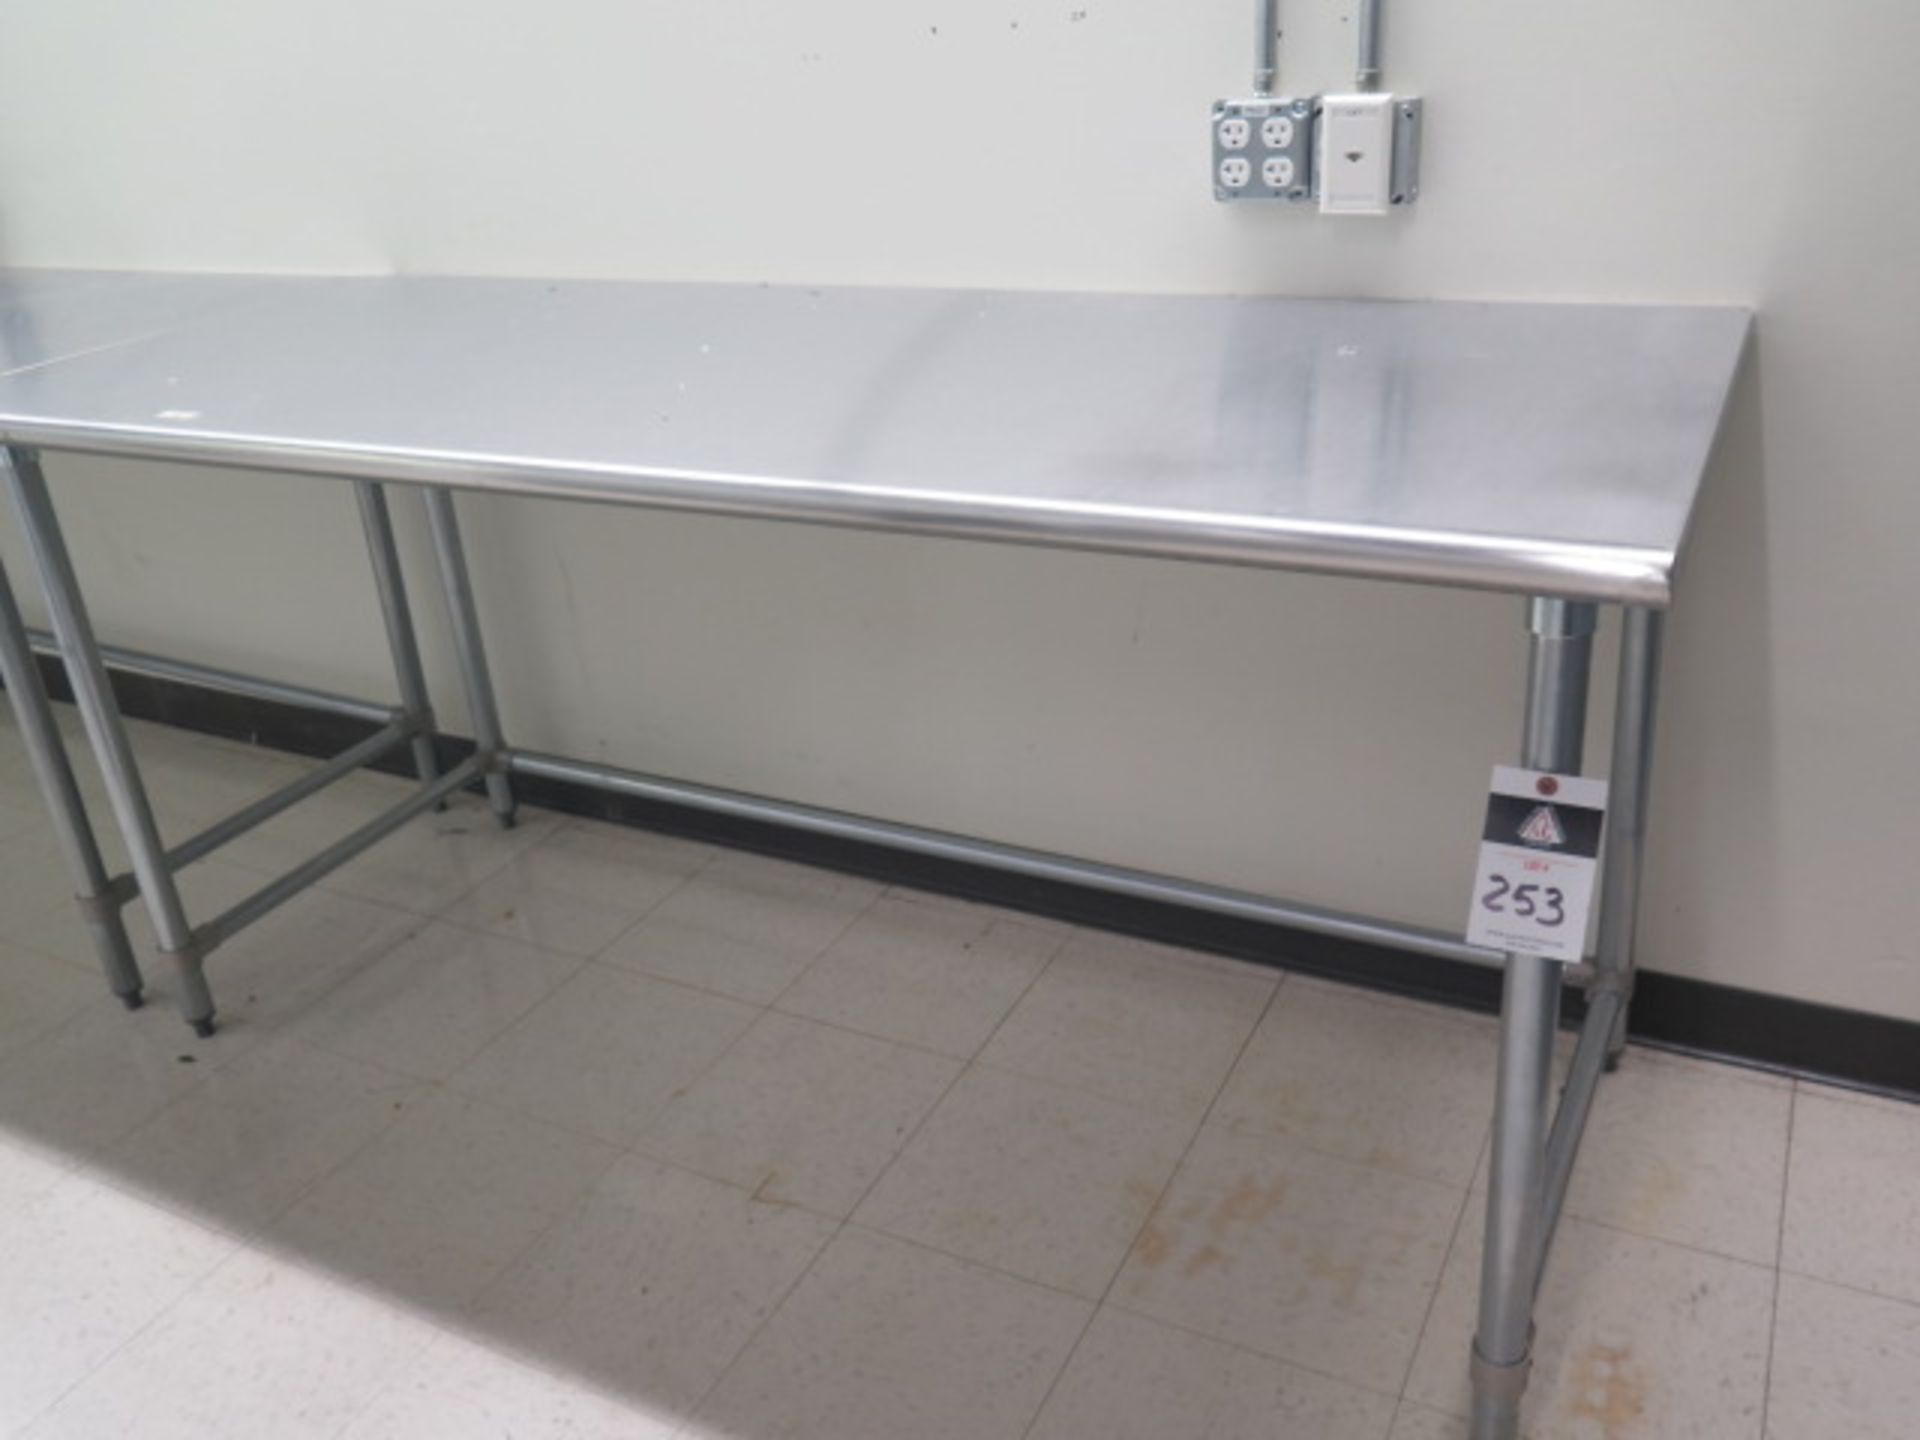 30" x 72" Stainless Steel Lab Benches (3) (SOLD AS-IS - NO WARRANTY)